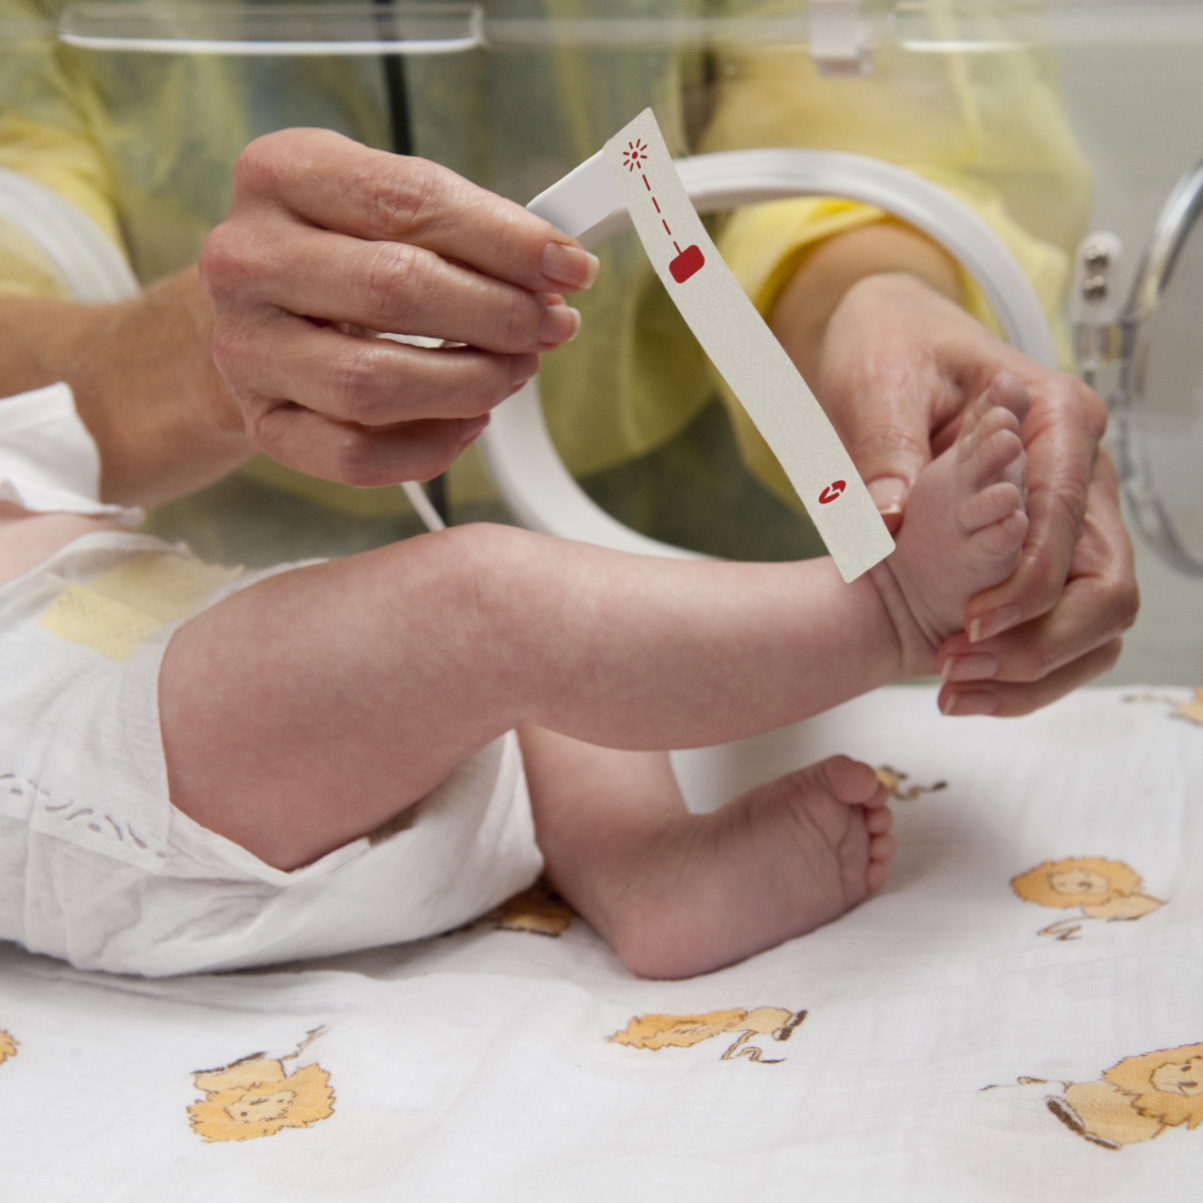 Infant in incubator in a hospital neonatal intensive care unit with a clinician applying a Masimo pulse oximetry sensor. 